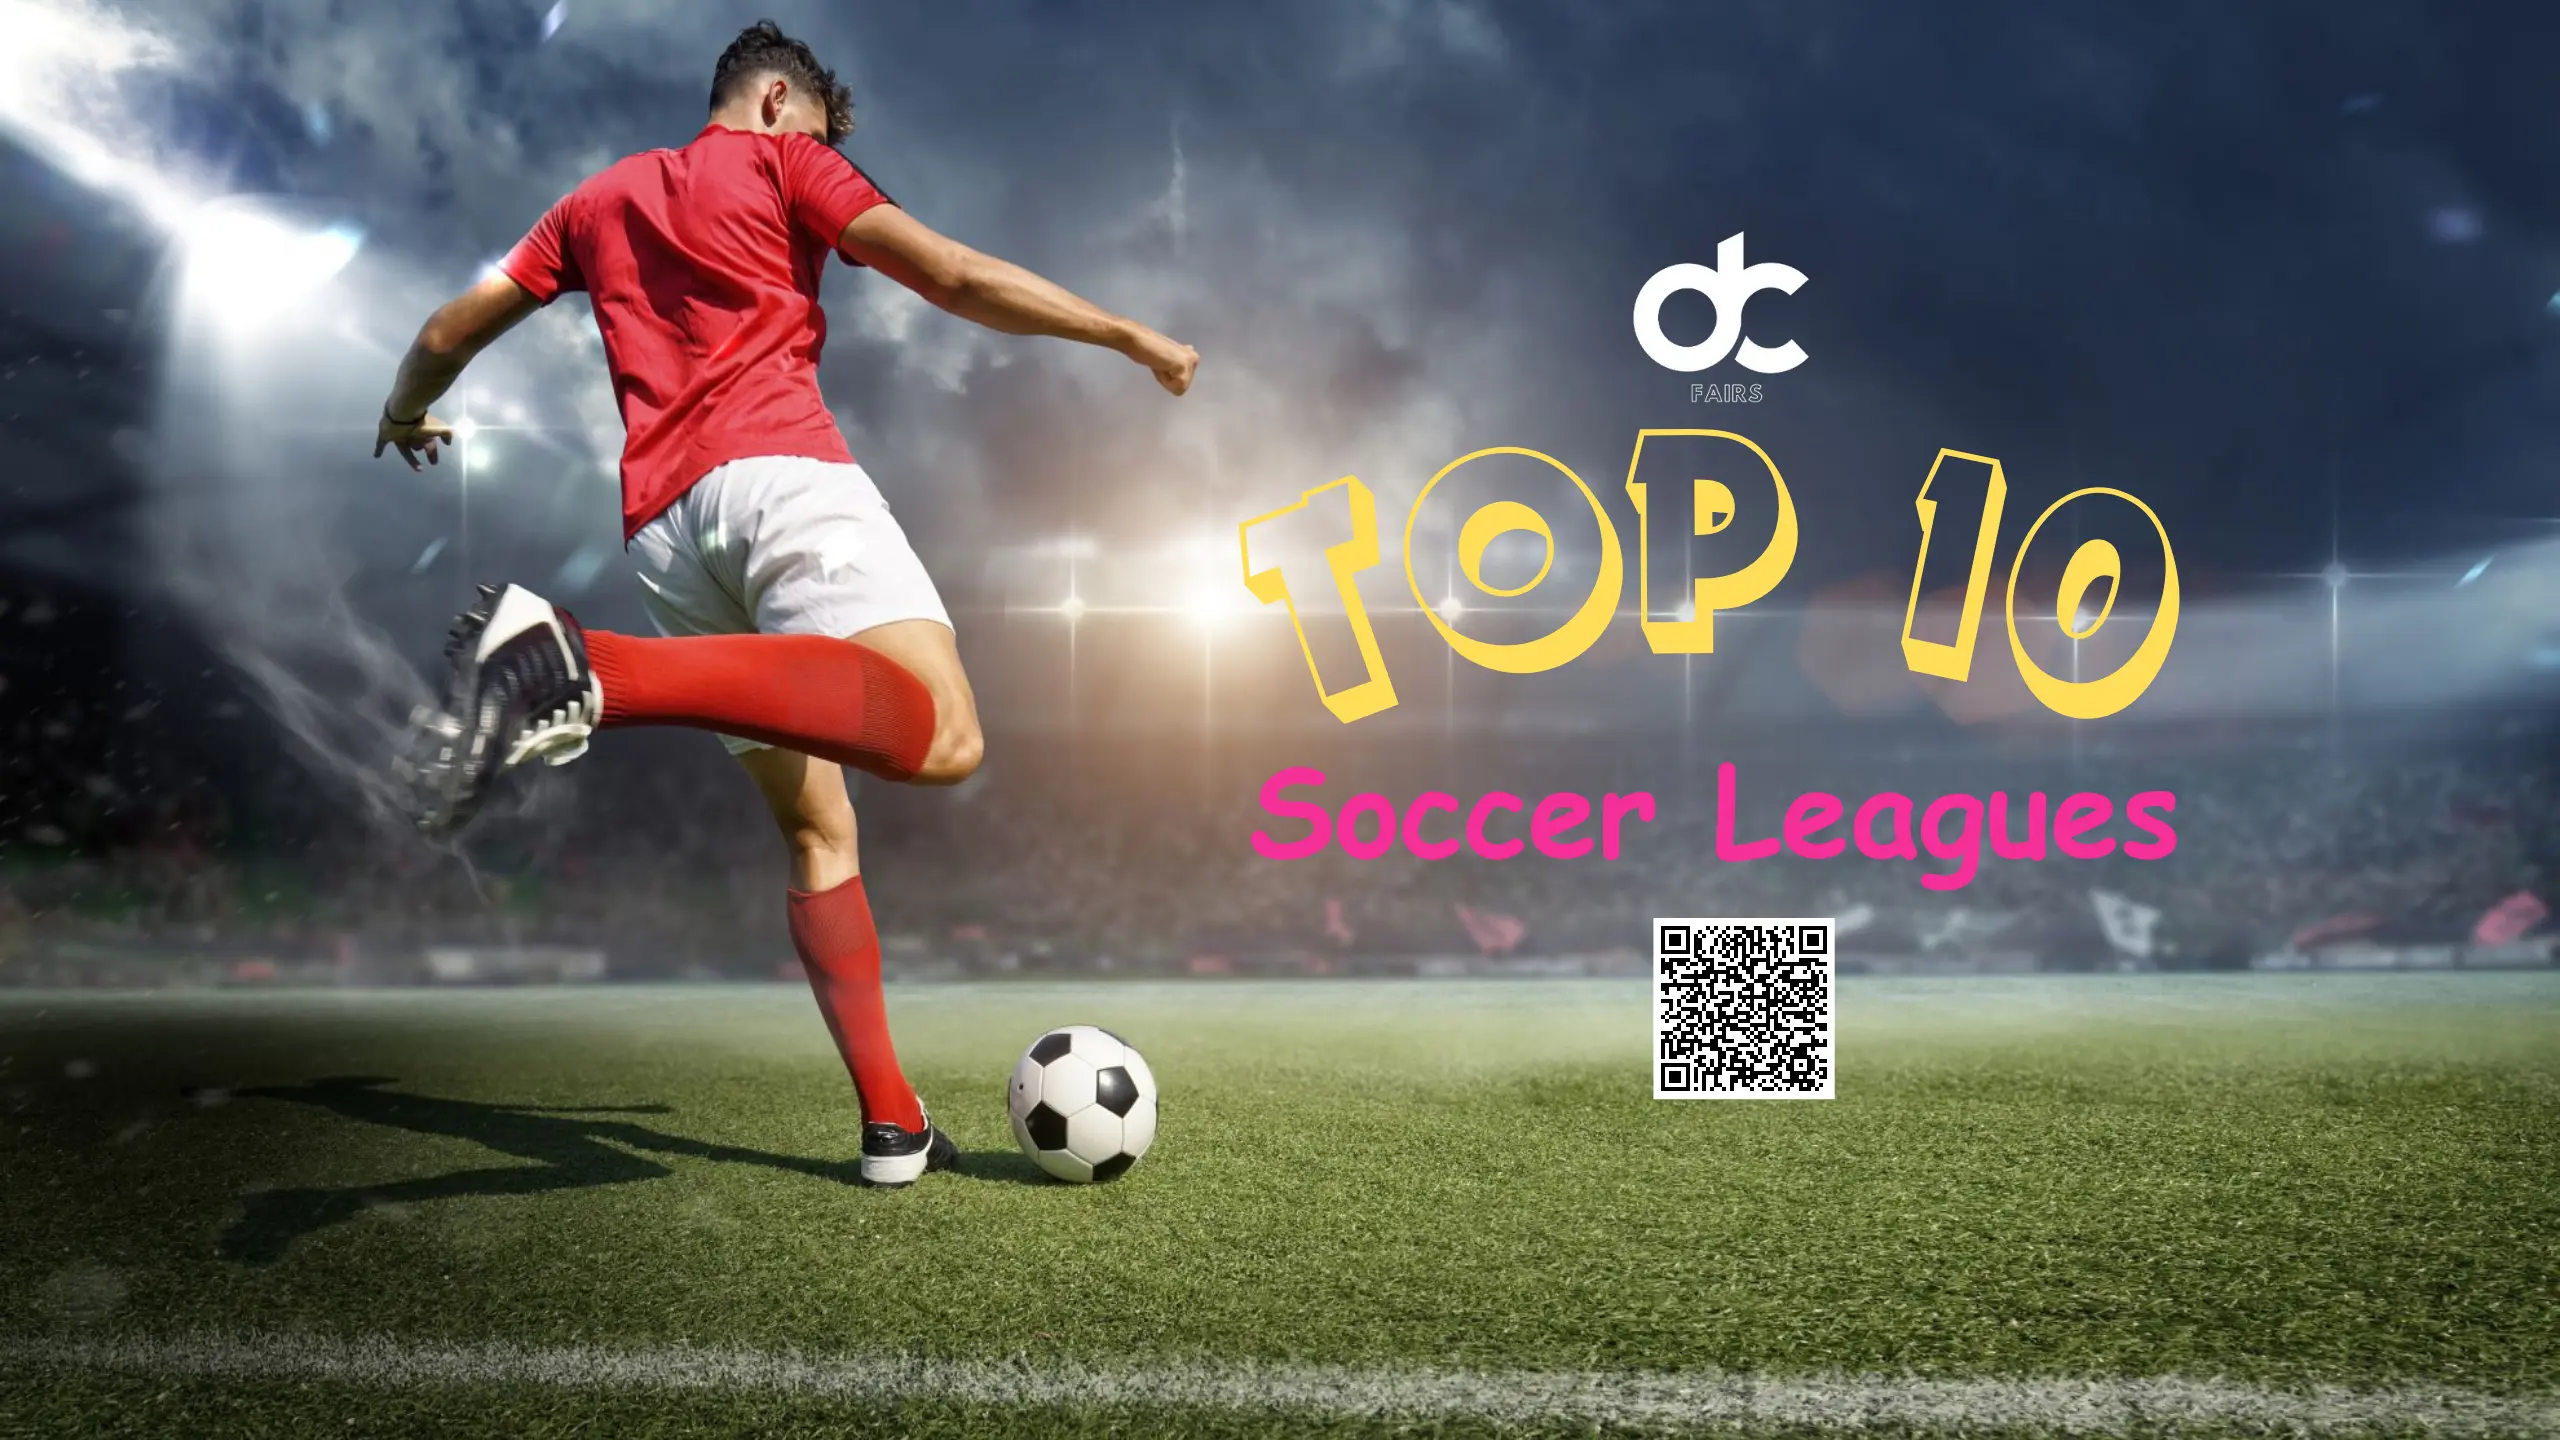 Global Football Fever Unveiling the Top 10 Soccer Leagues Around the World